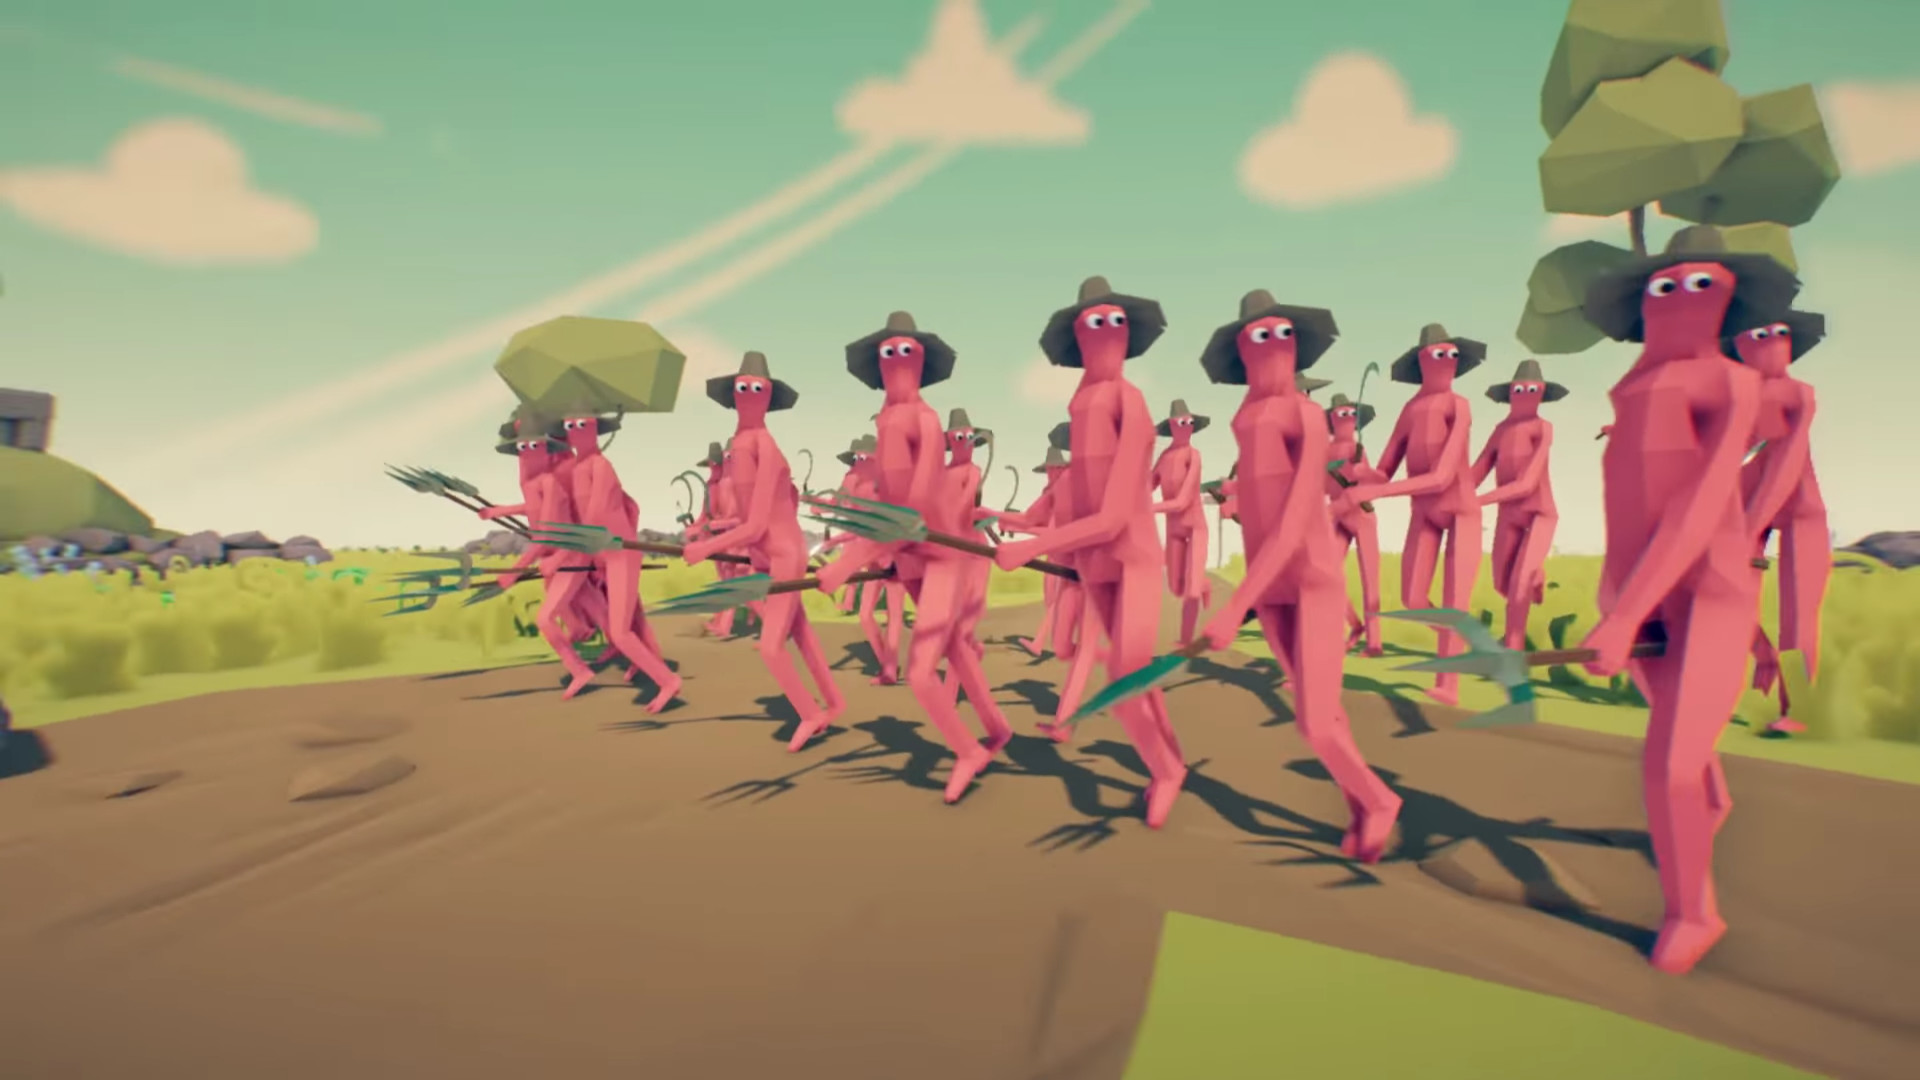 totally accurate battle simulator update history